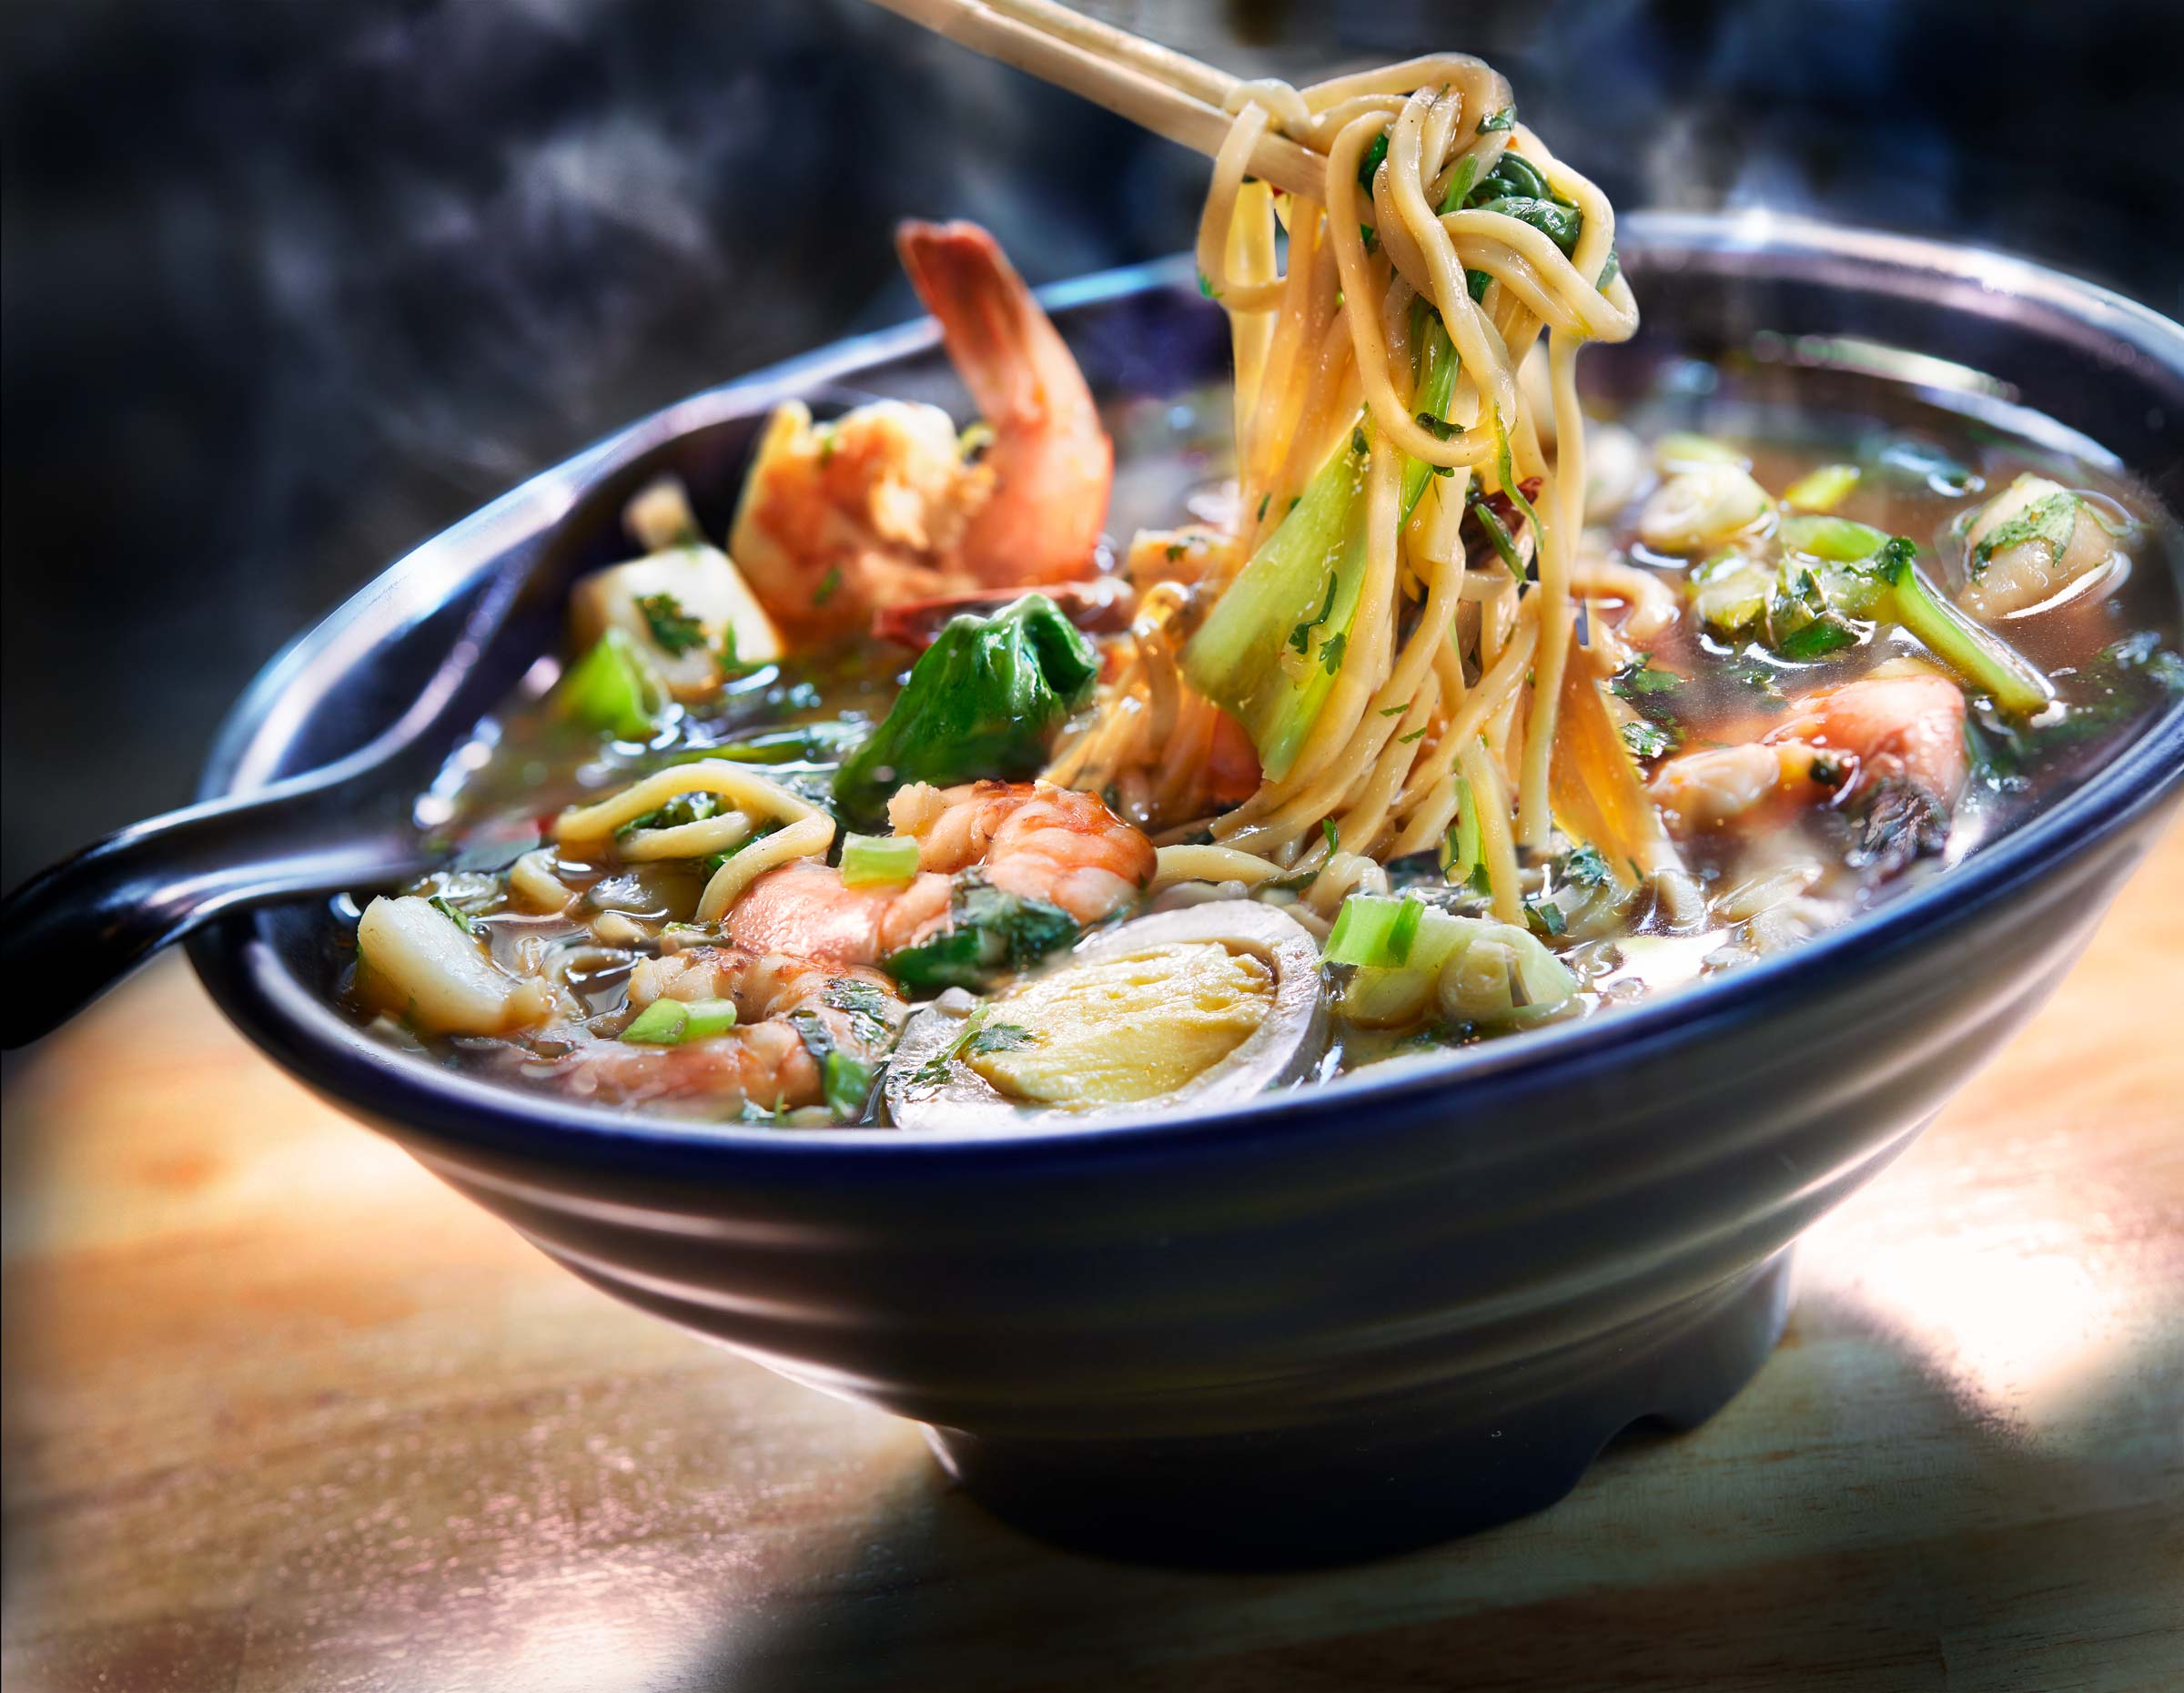 Seafood Noodle Soup,  beef bone broth, shrimp, scallops, egg, green onions, cilantro, baby bok choy at Steam Boys